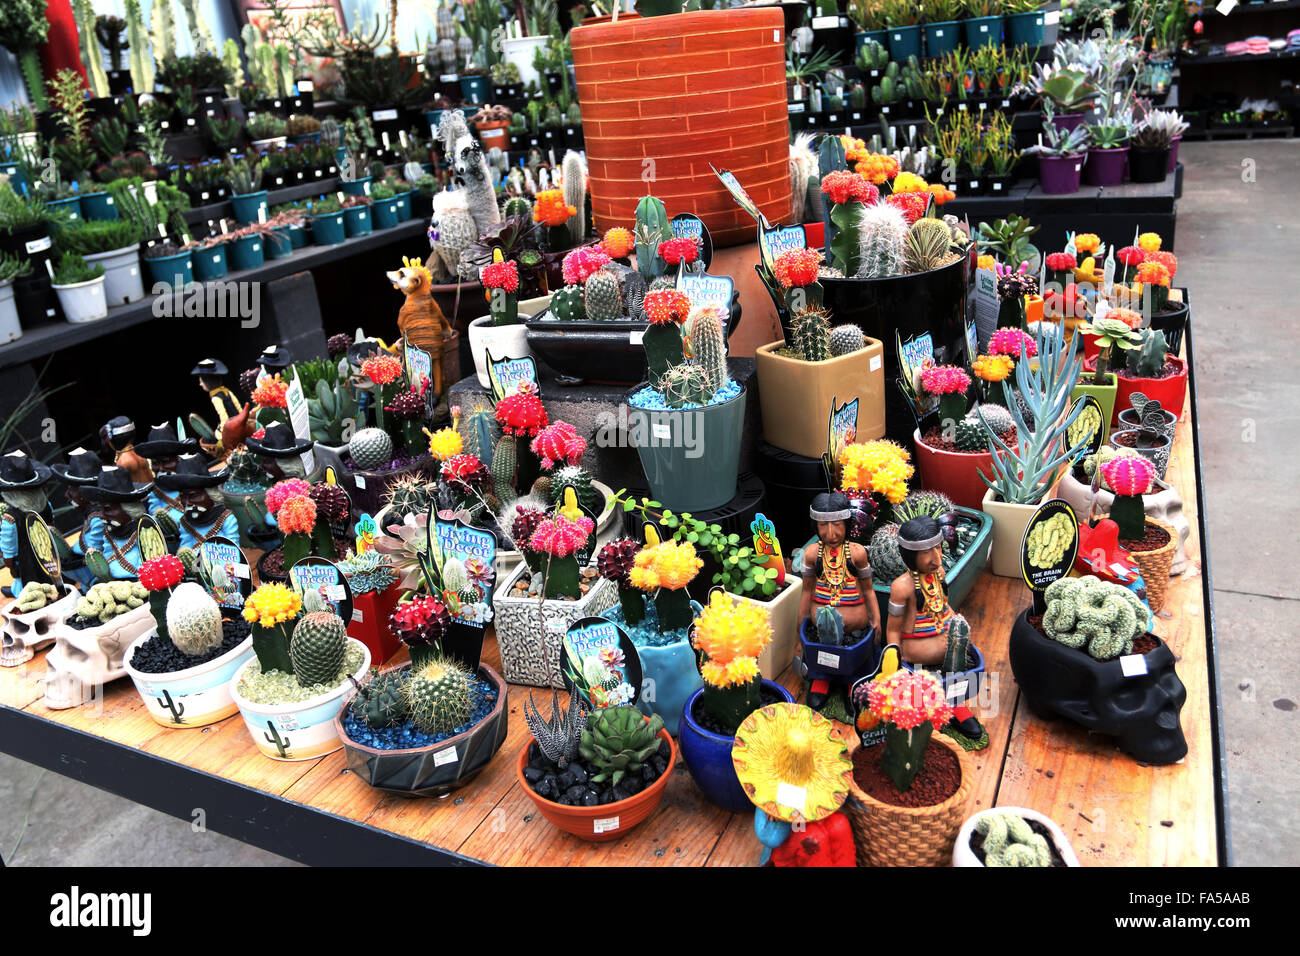 All kind of cactus and succulents for sale at a local nursery Stock Photo